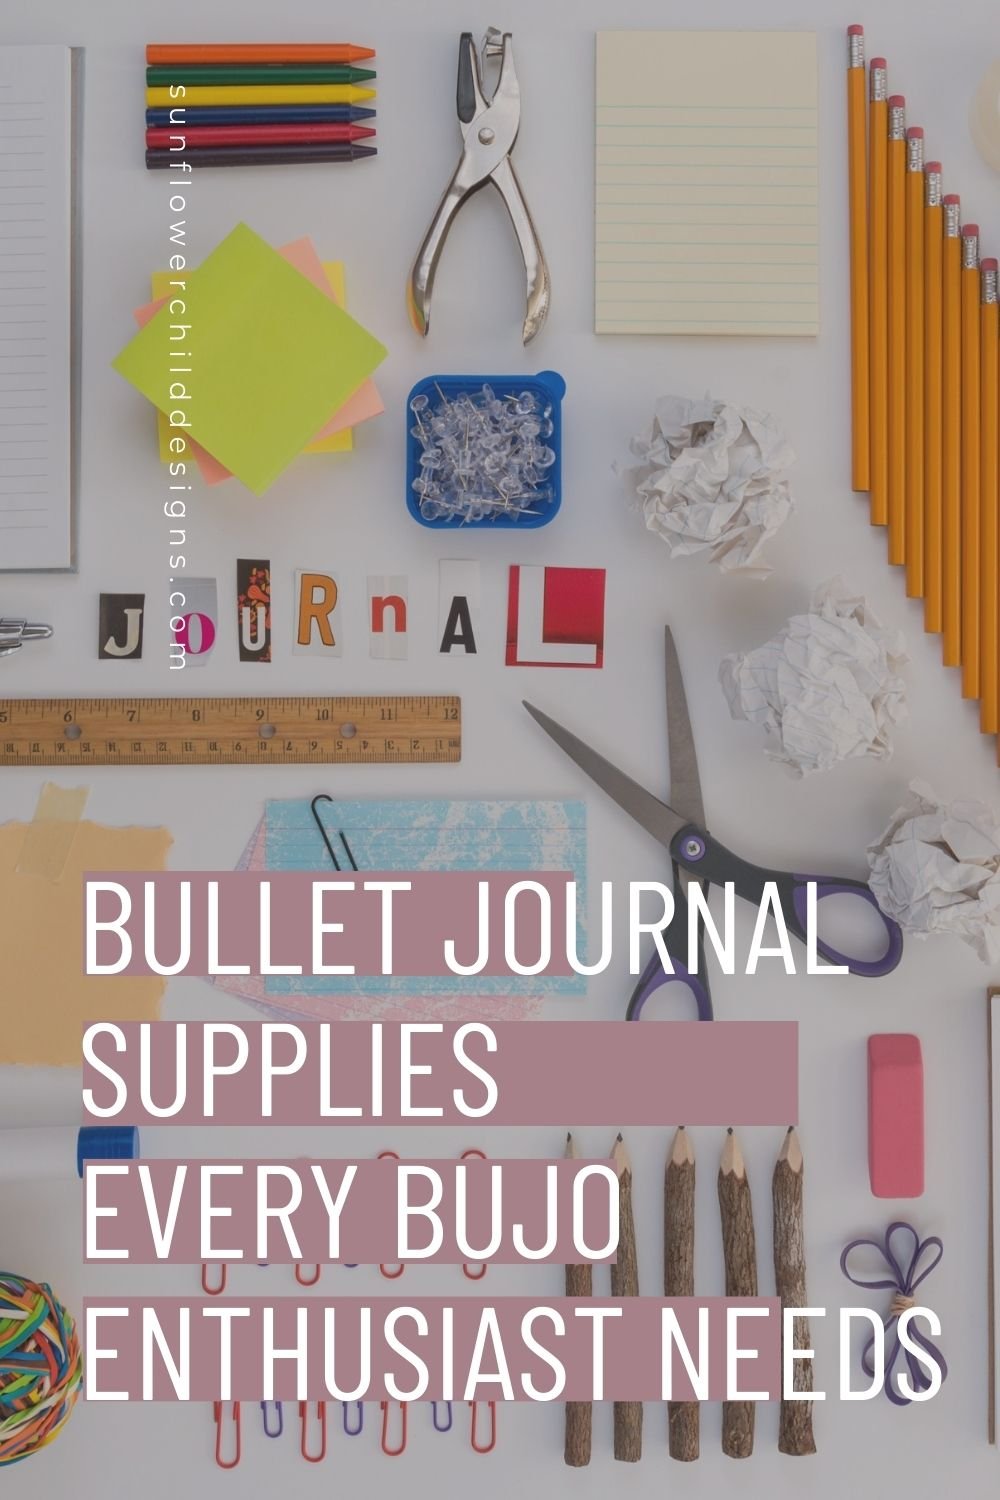 7 Must-Have Bullet Journal Supplies to Get You Started! - The